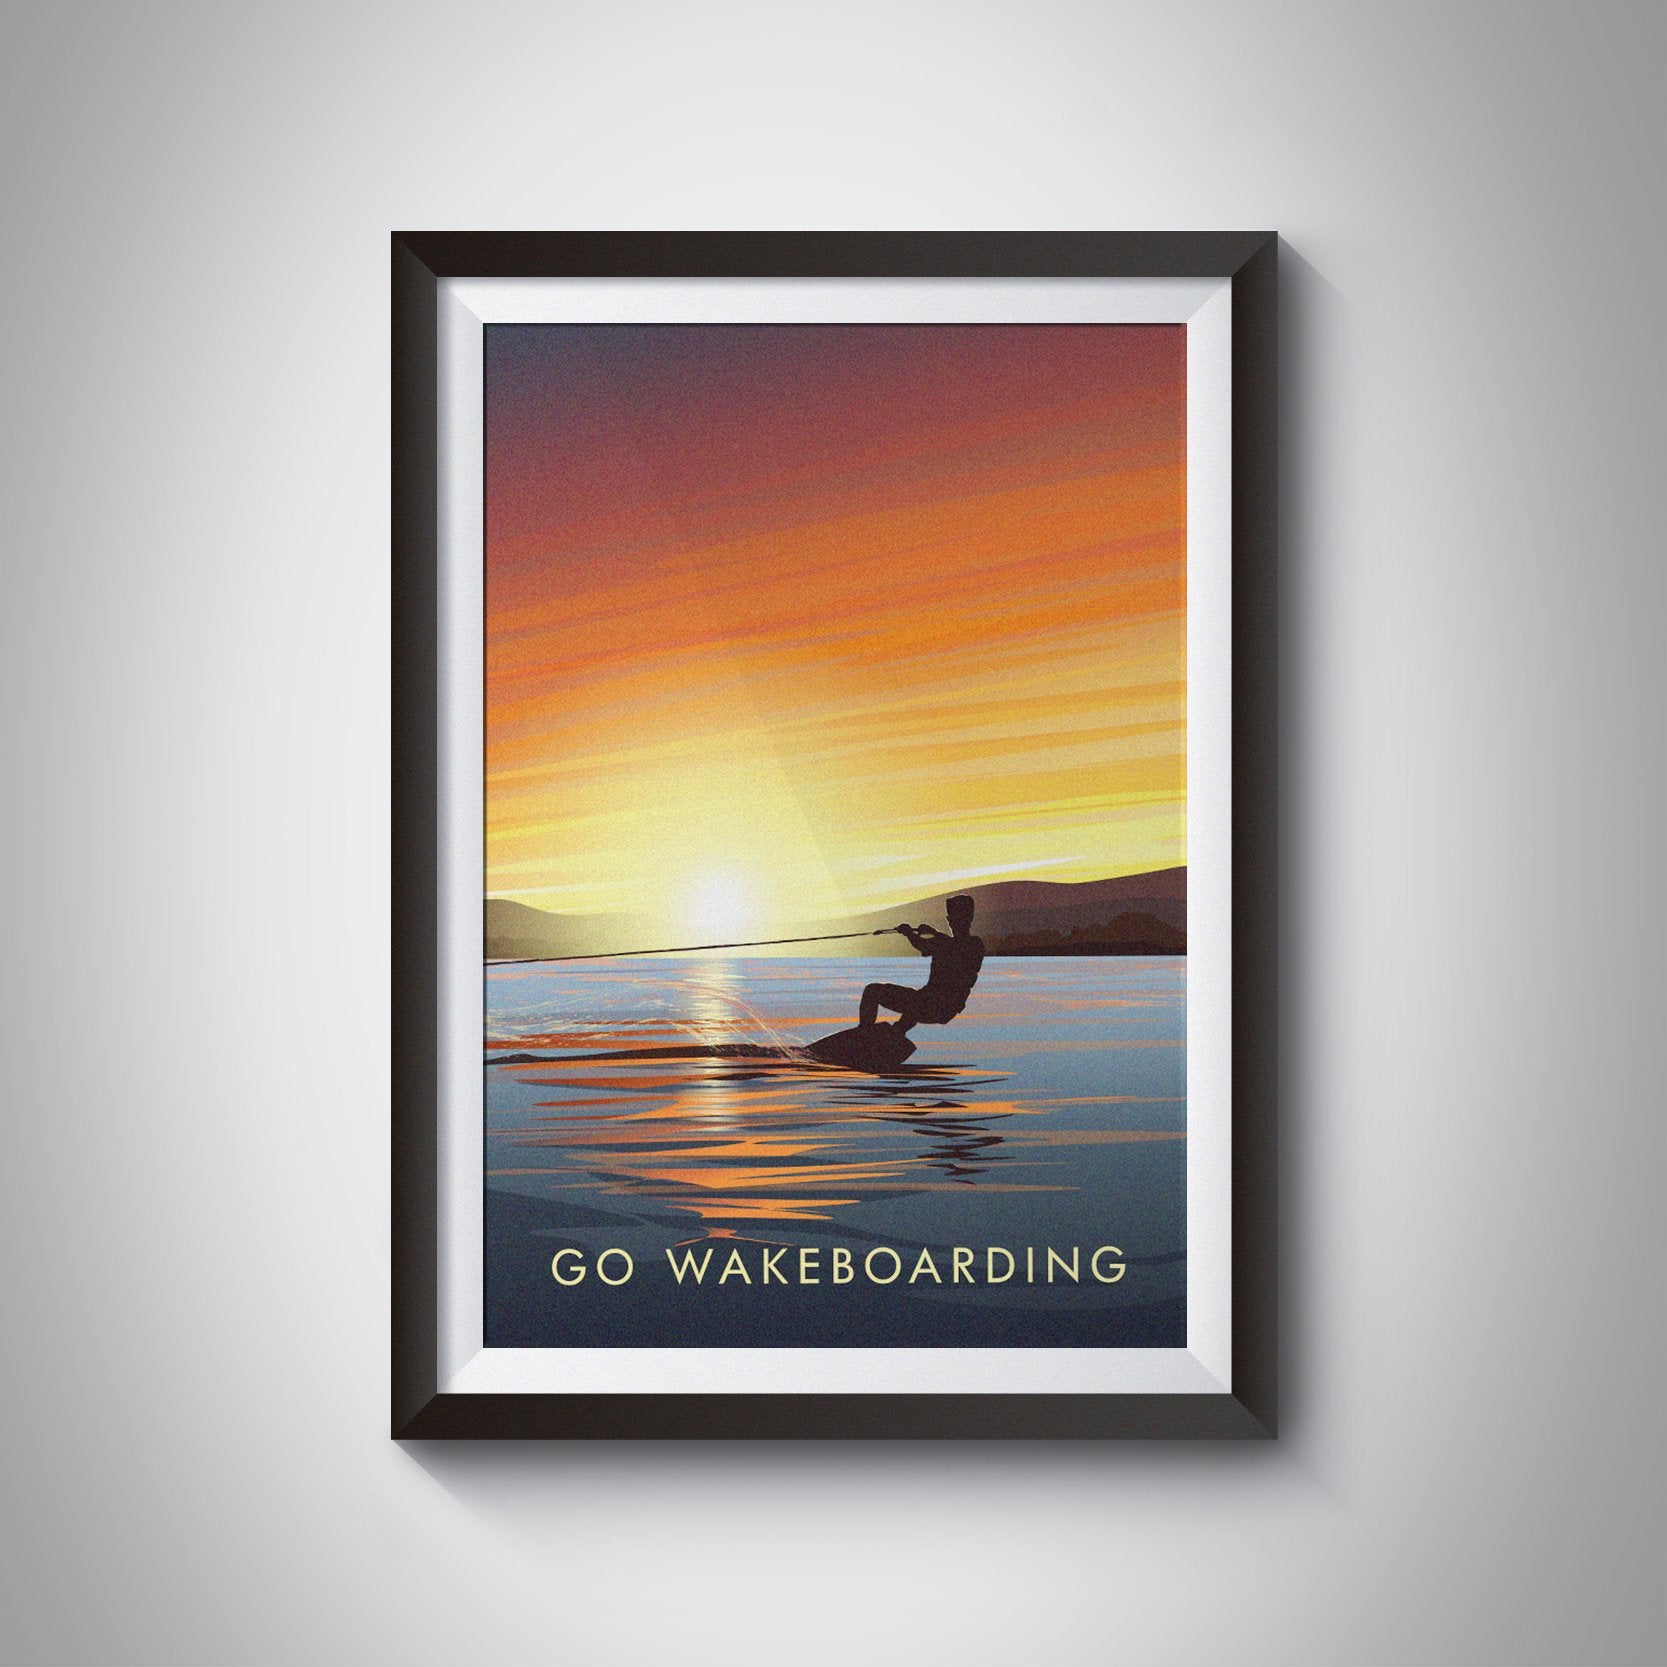 Go Wakeboarding Travel Poster